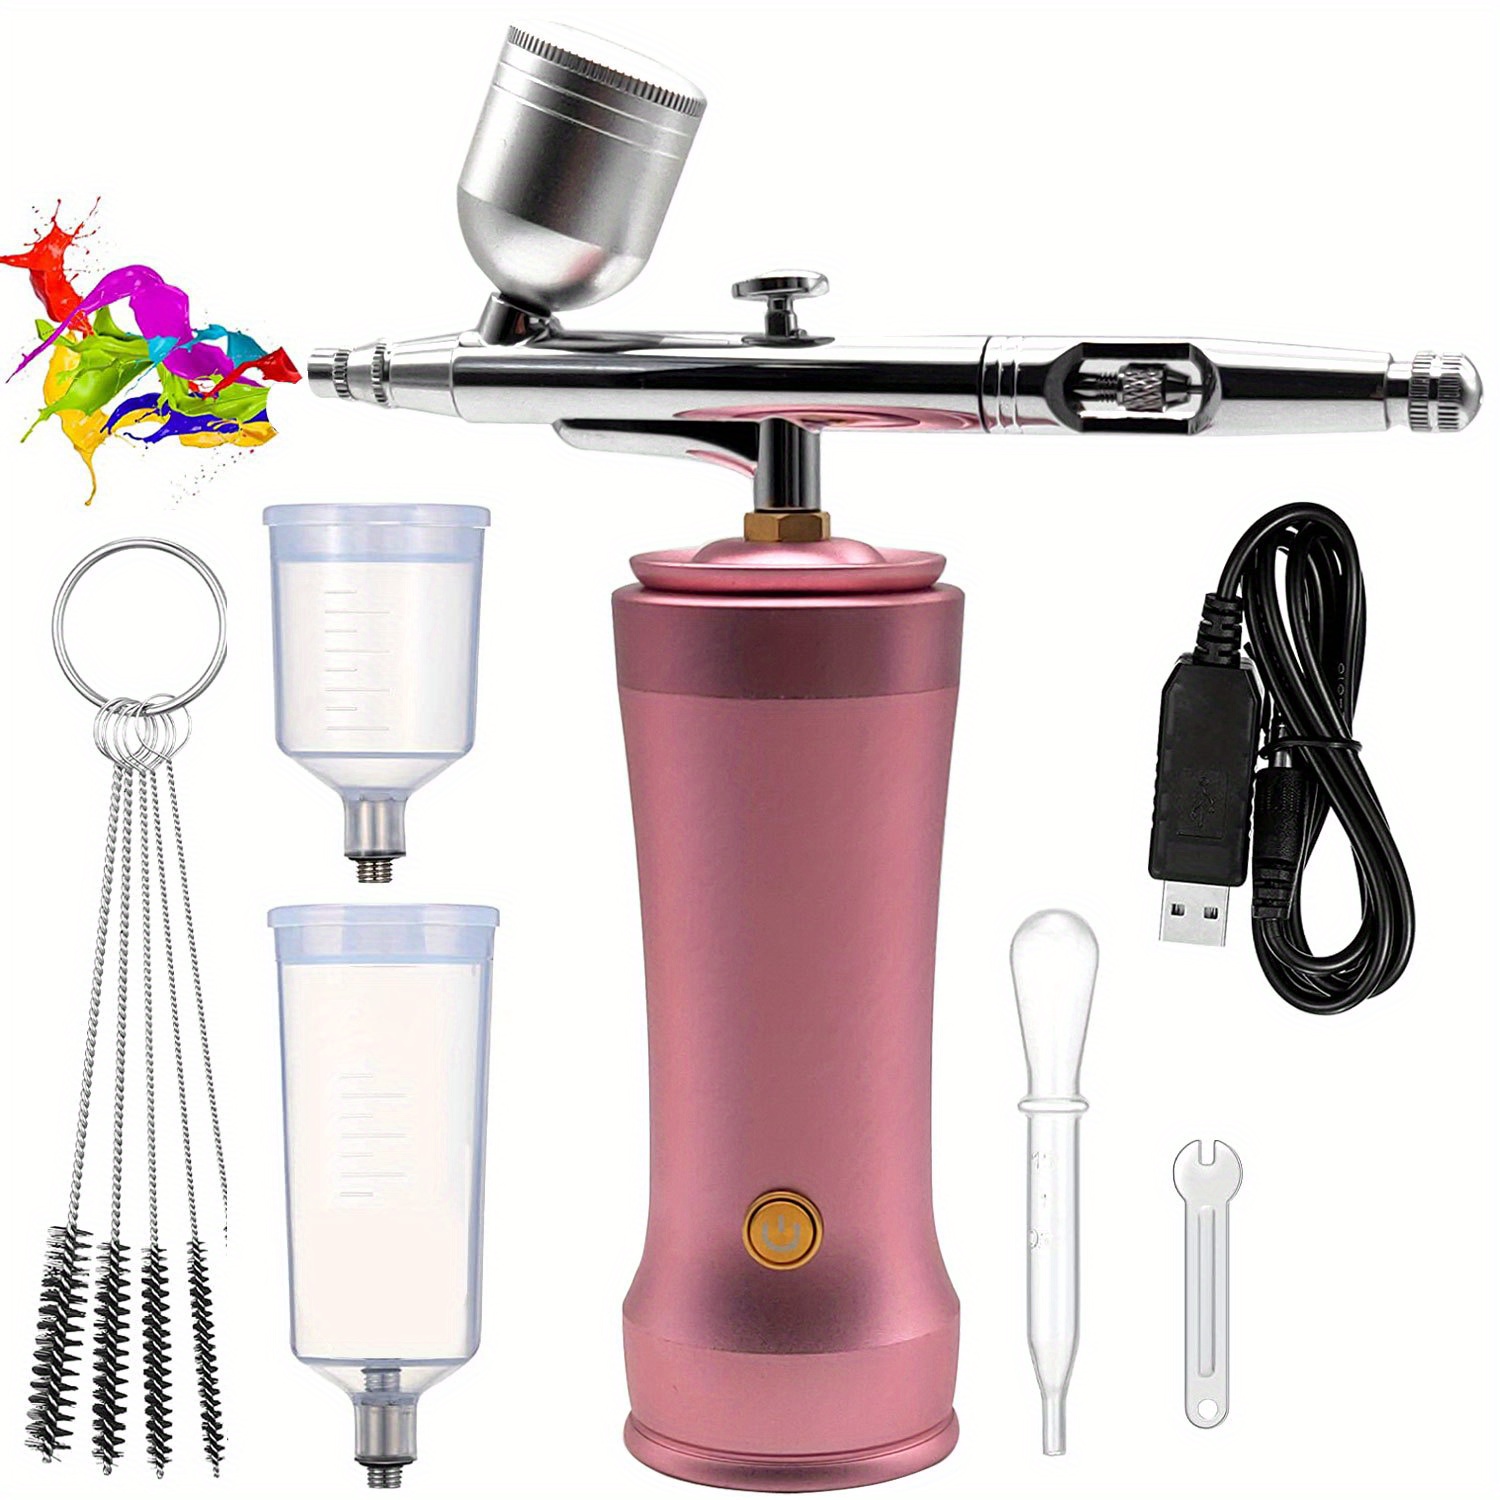 Fantexy Multi-Purpose Airbrush kit with Compressor, Portable Mini Air  Compressor Gravity Feed Airbrush Set for Makeup,Cake Decorating, Nail